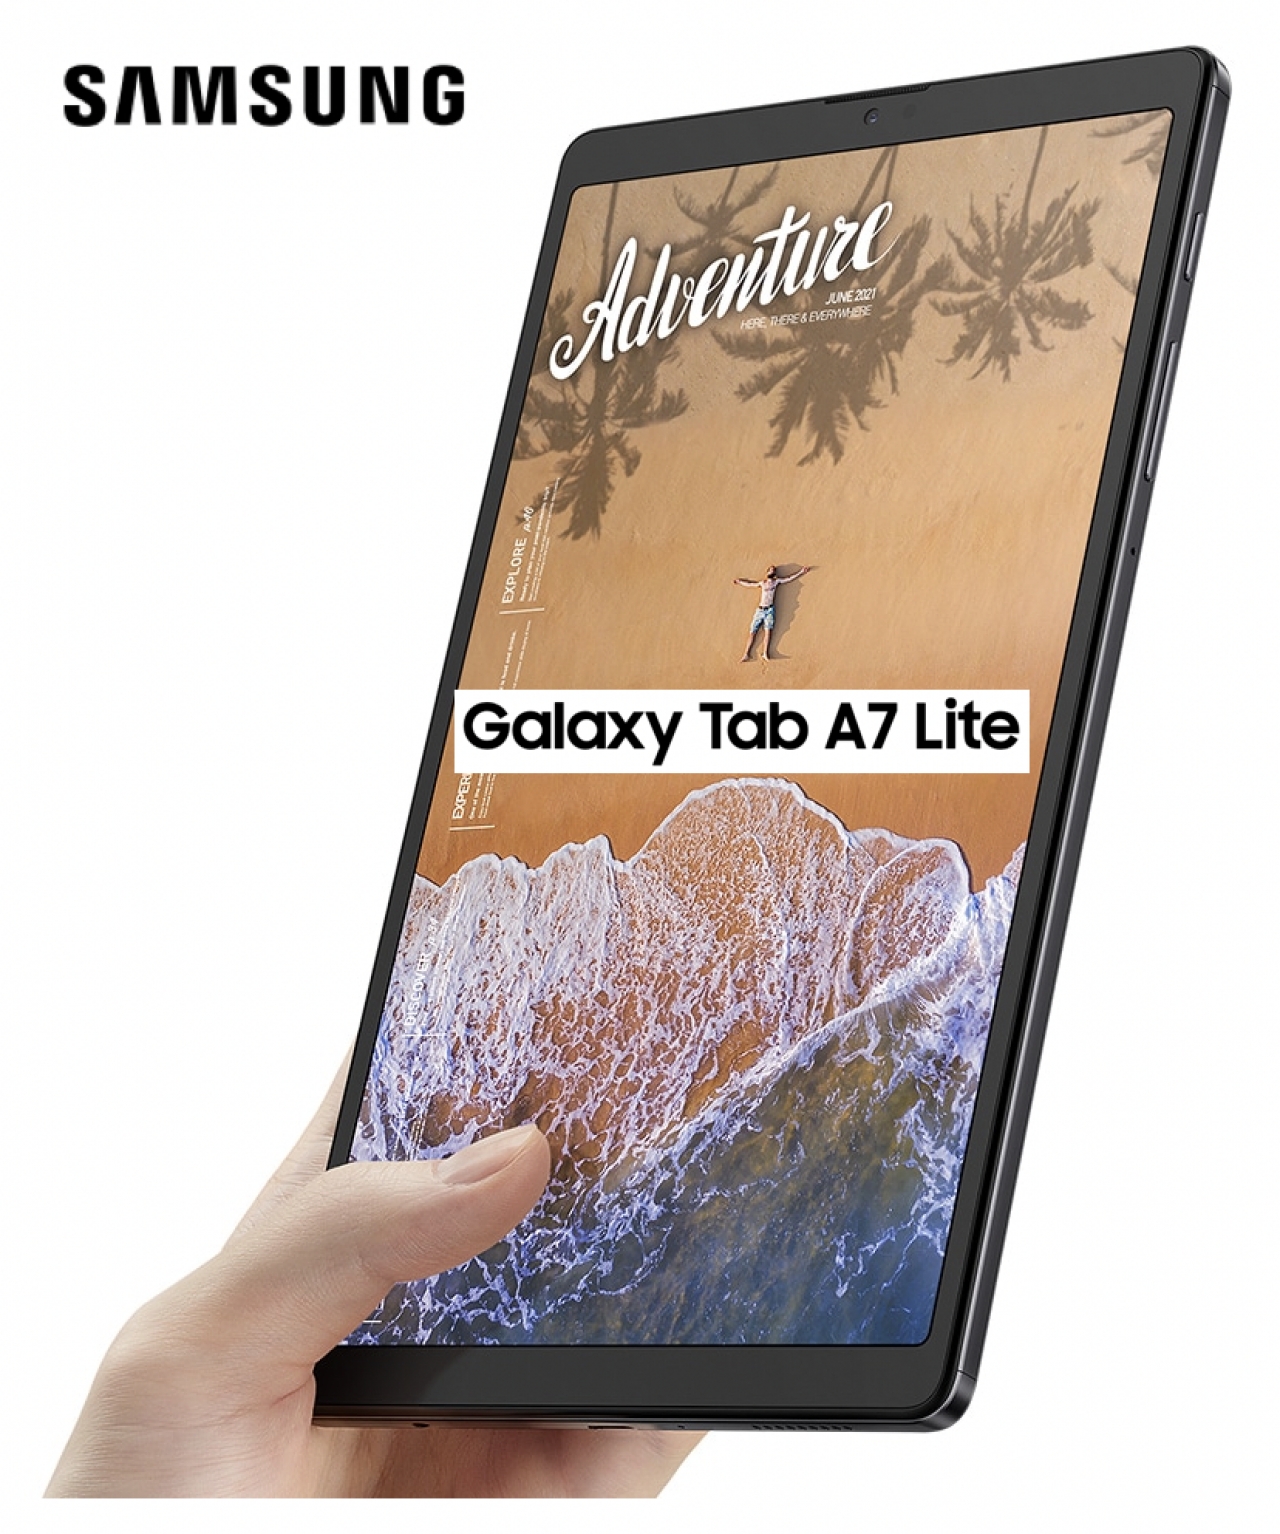 The budget Samsung Galaxy Tab A7 Lite is now even cheaper